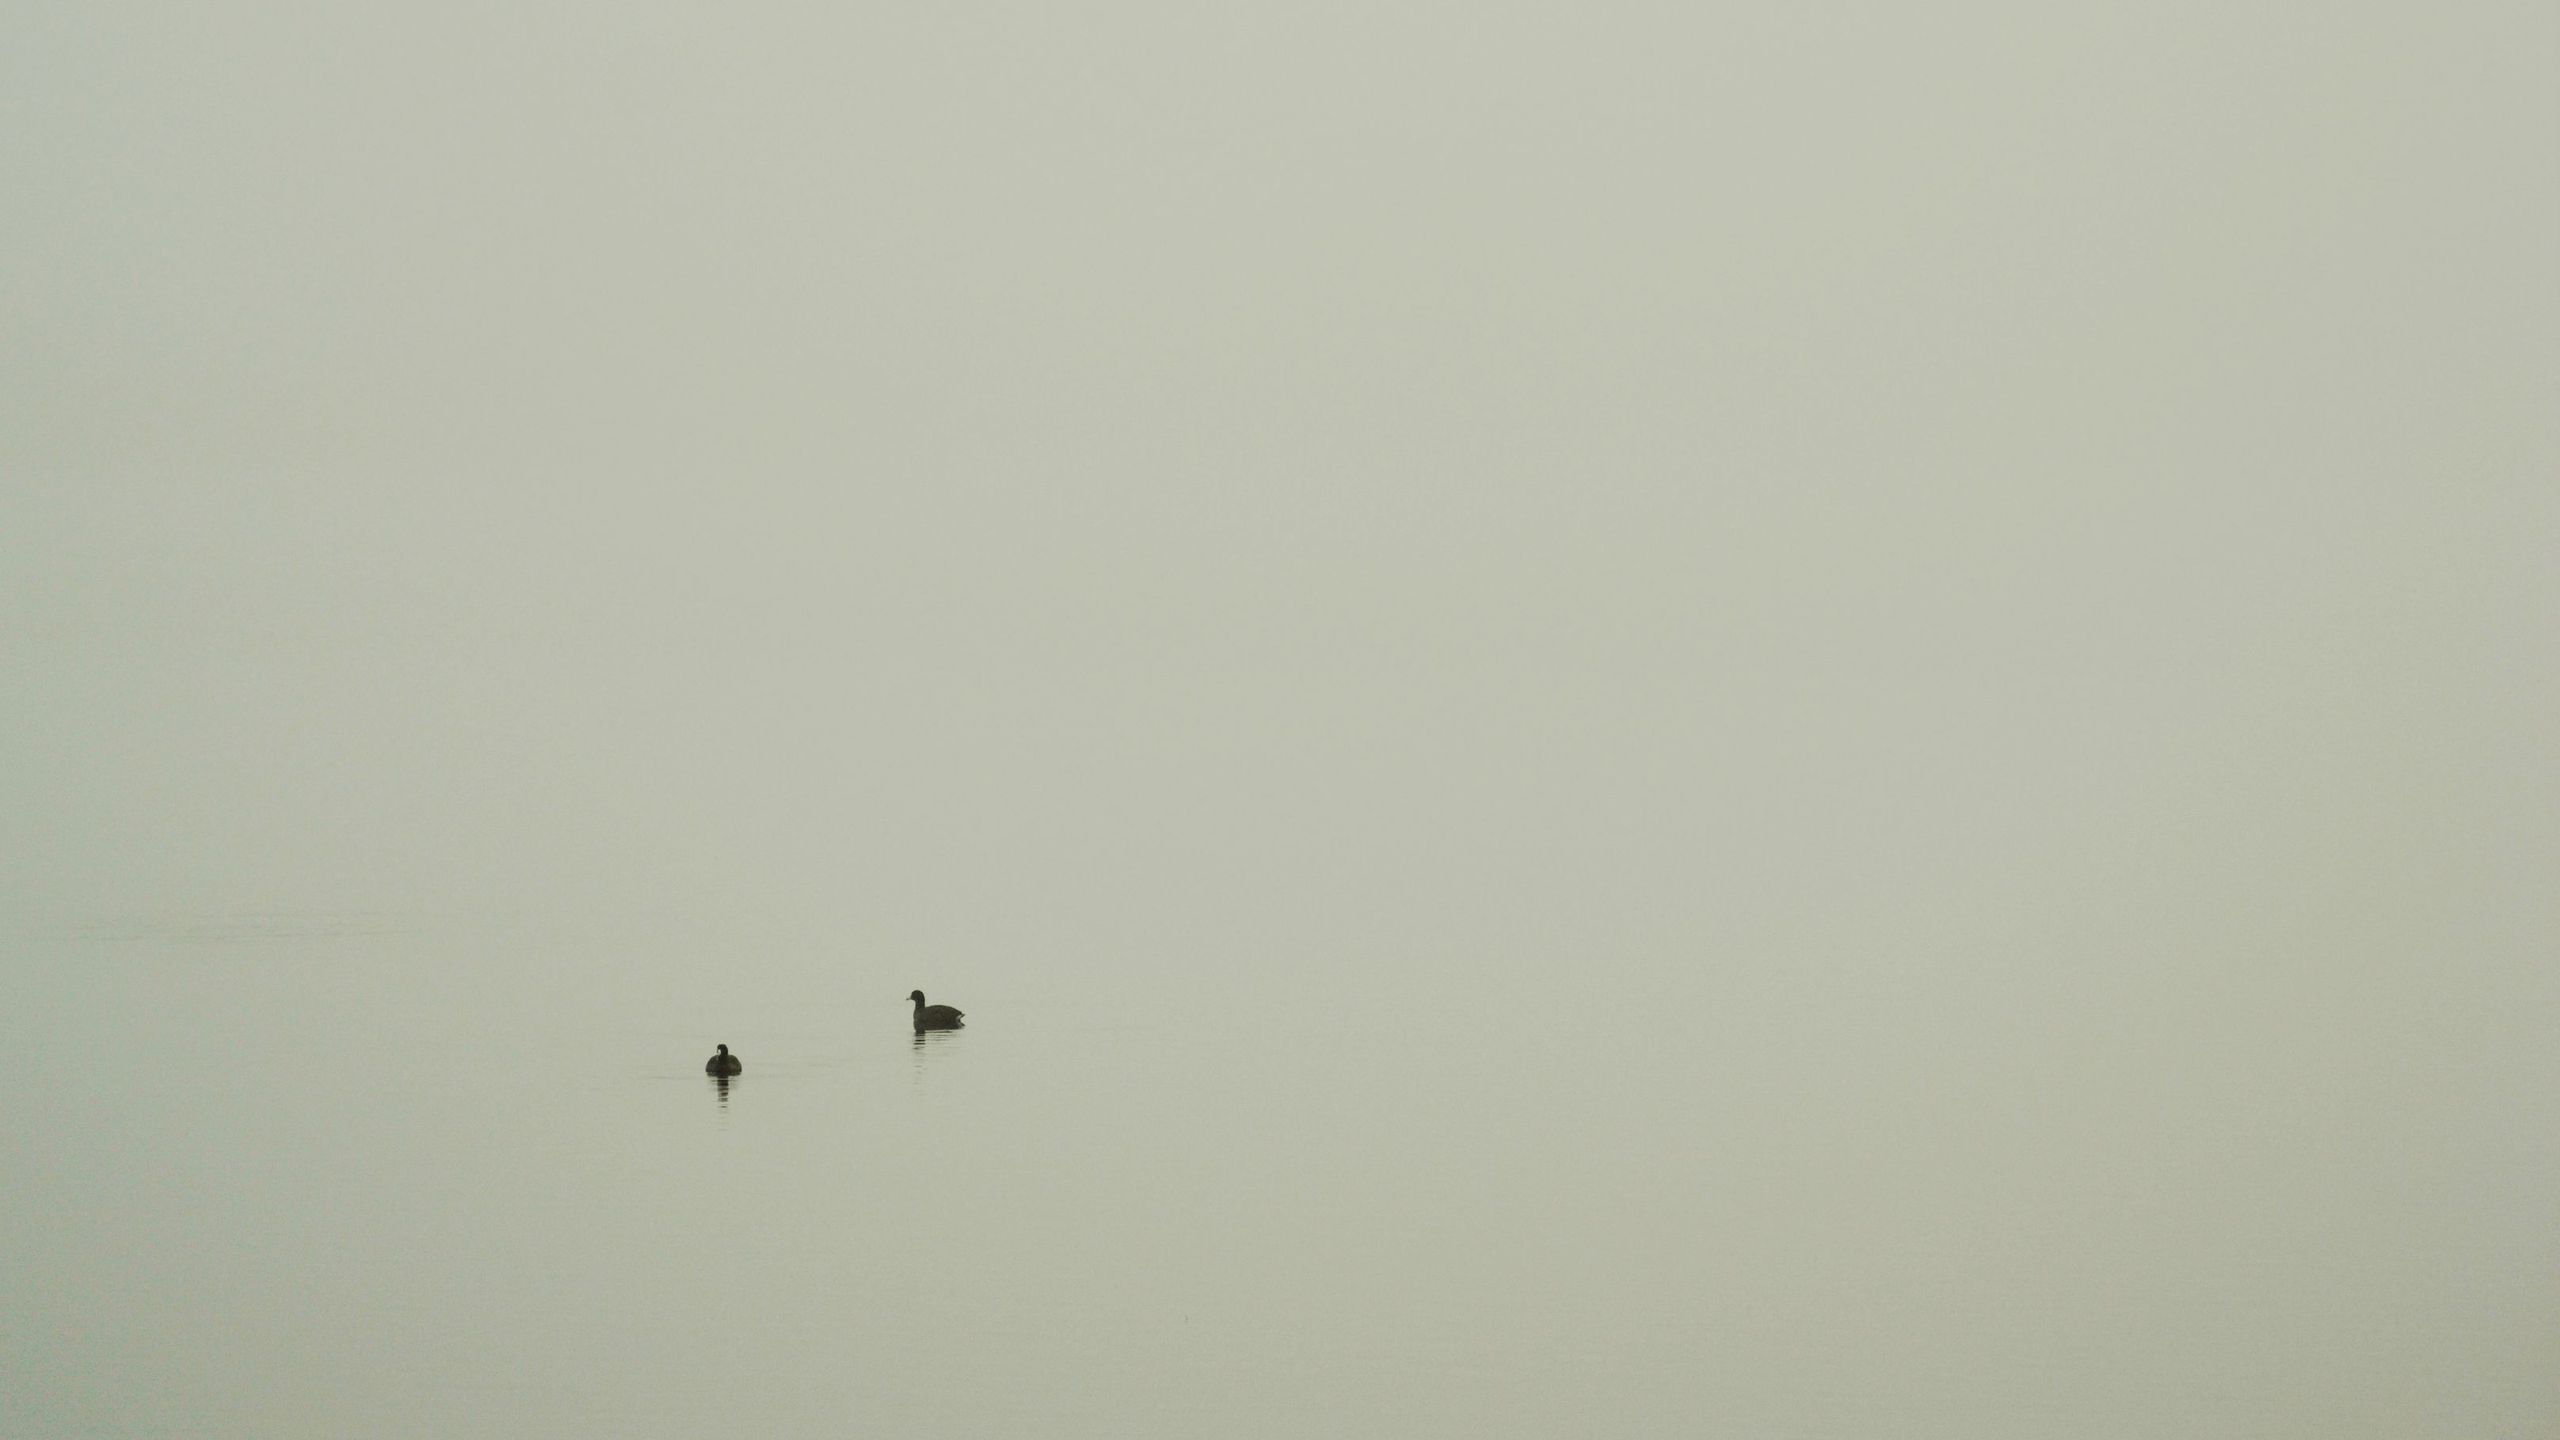 Wildlife preserve on a foggy day. Minimal or boring Any thoughts